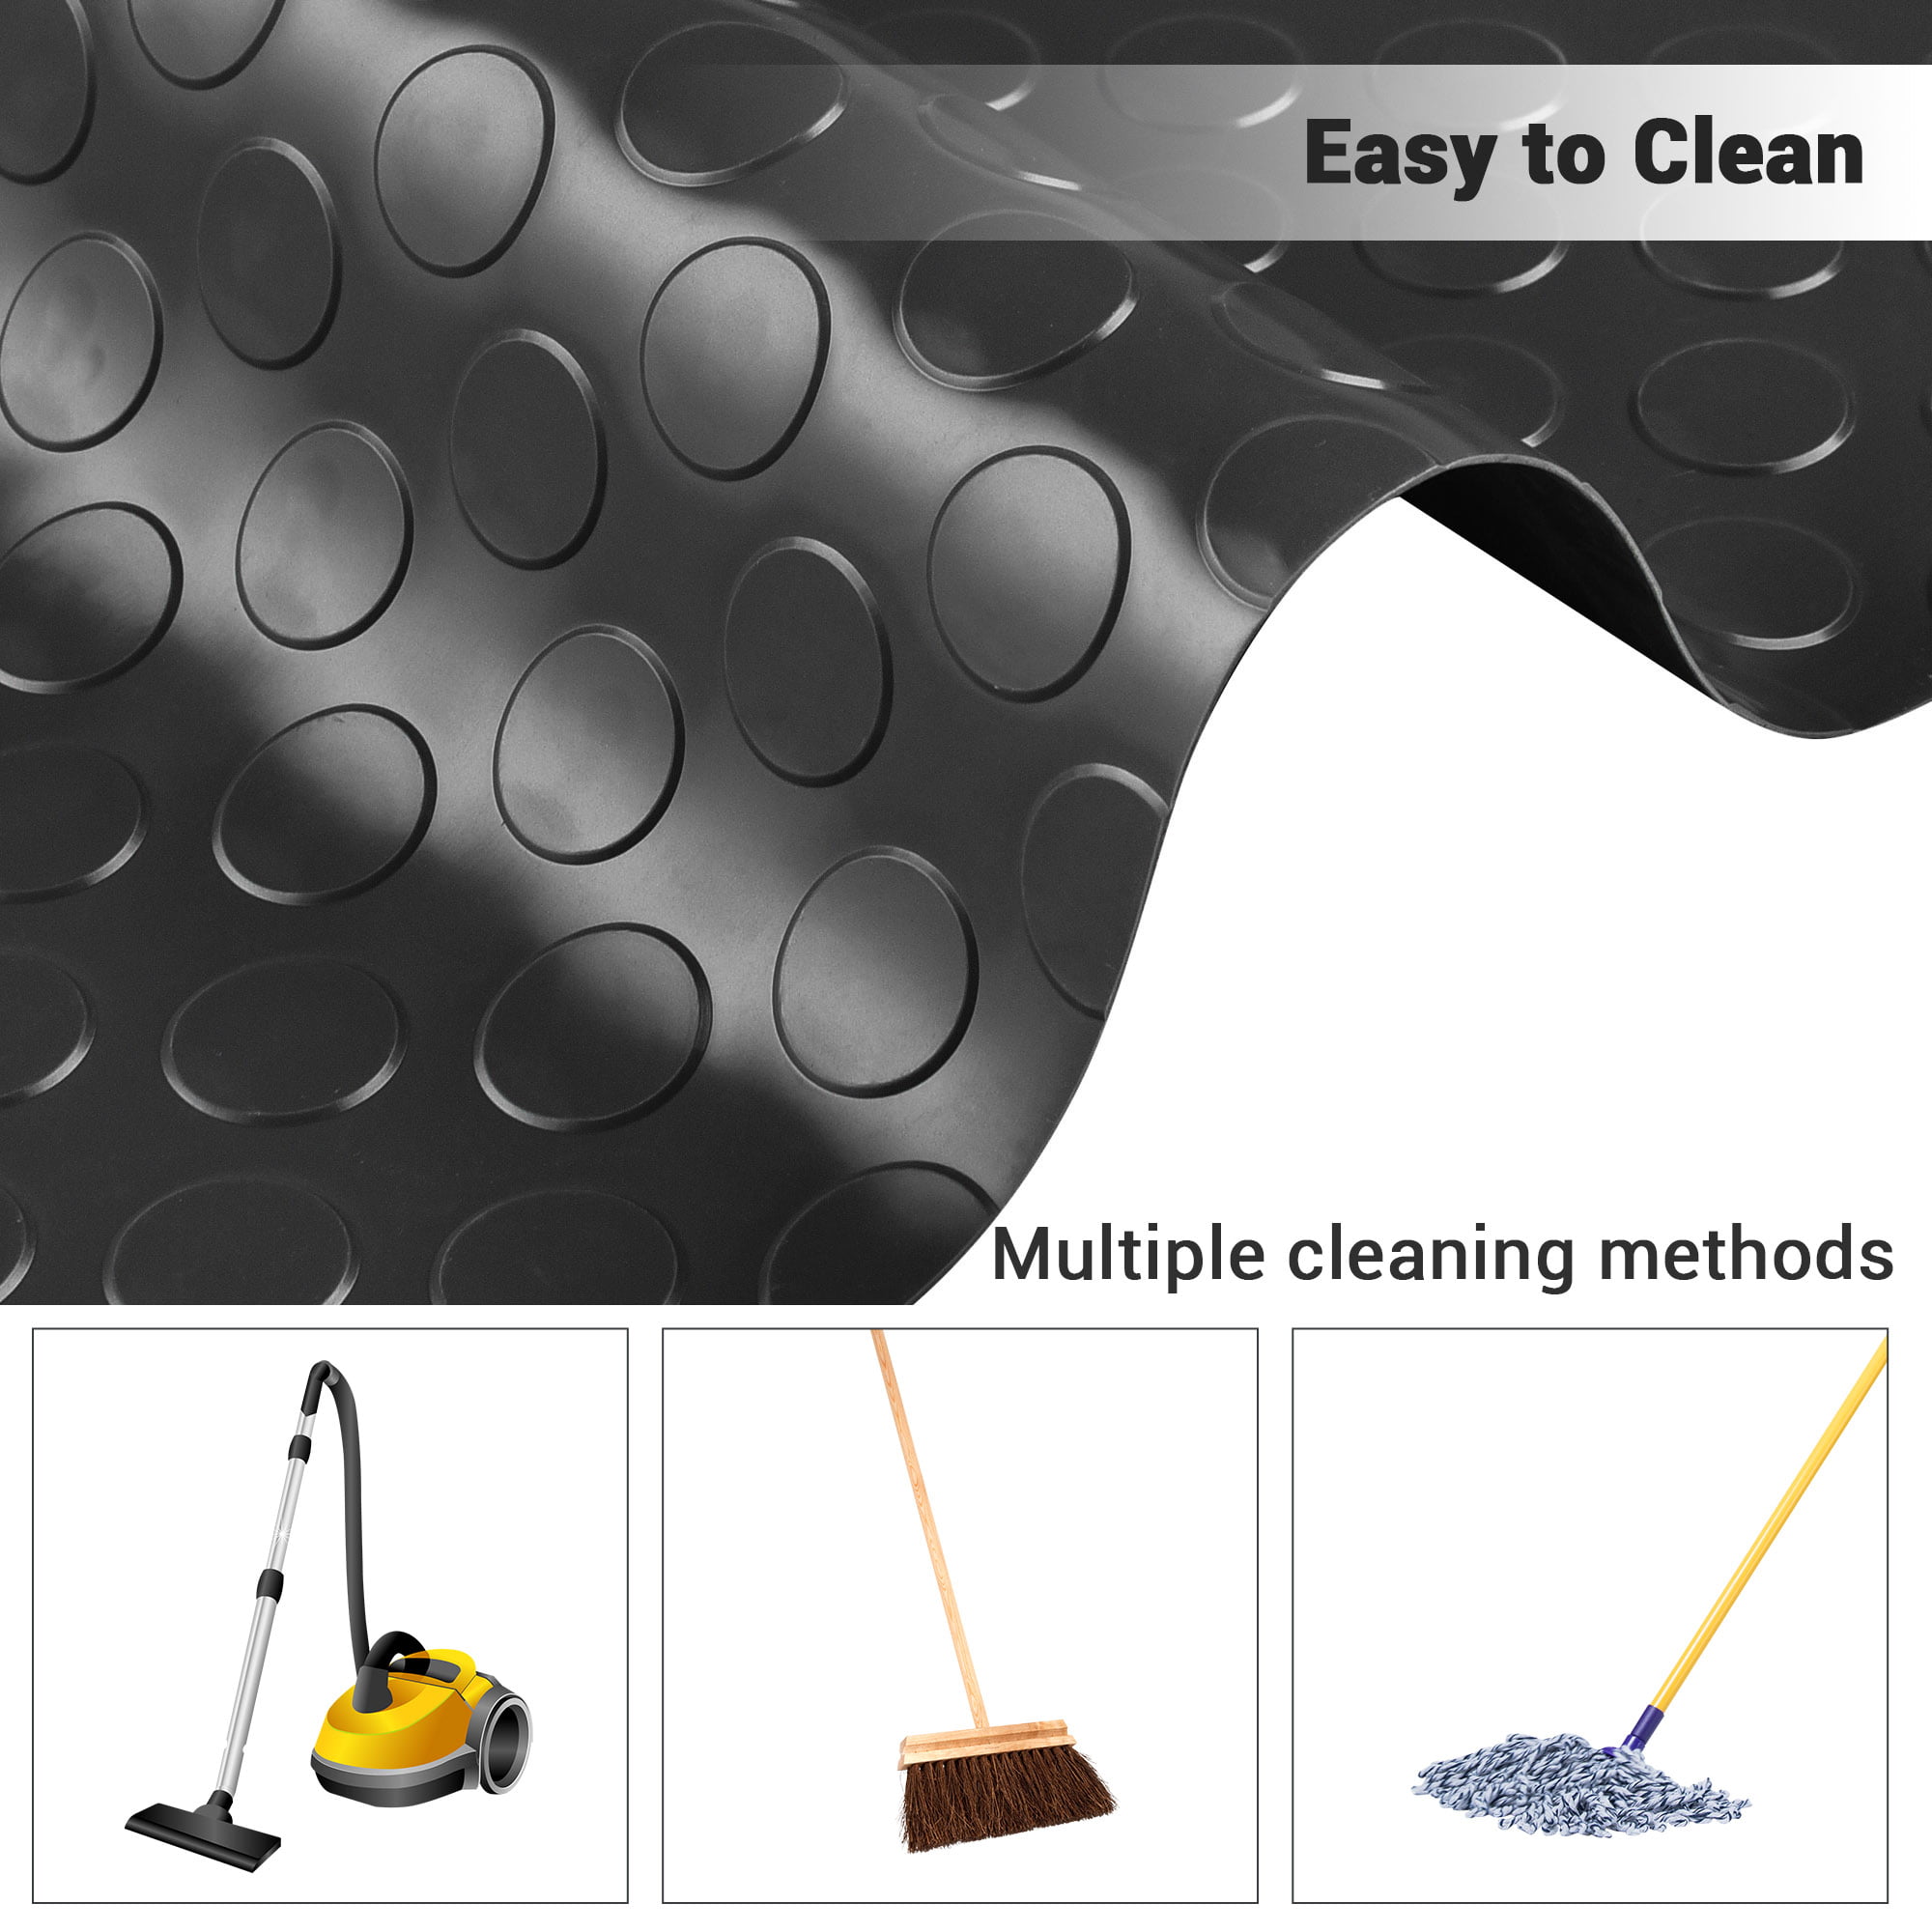 Garage Floor Cover for Snow Blower and LawnMower – KentainMats